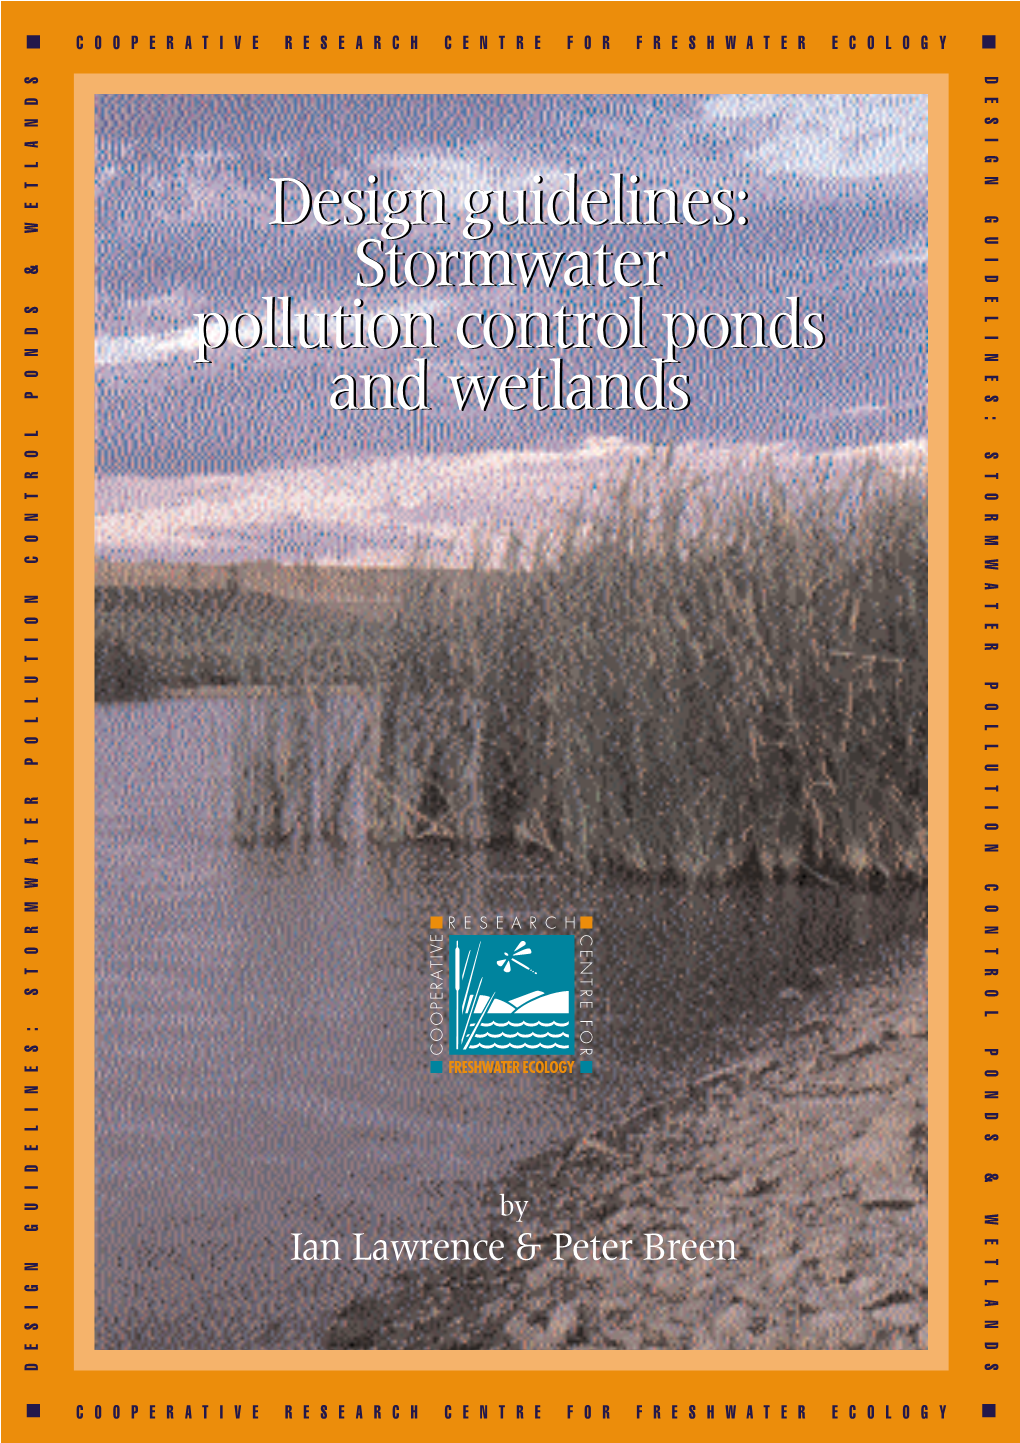 Design Guidelines: Stormwater Pollution Control Ponds and Wetlands